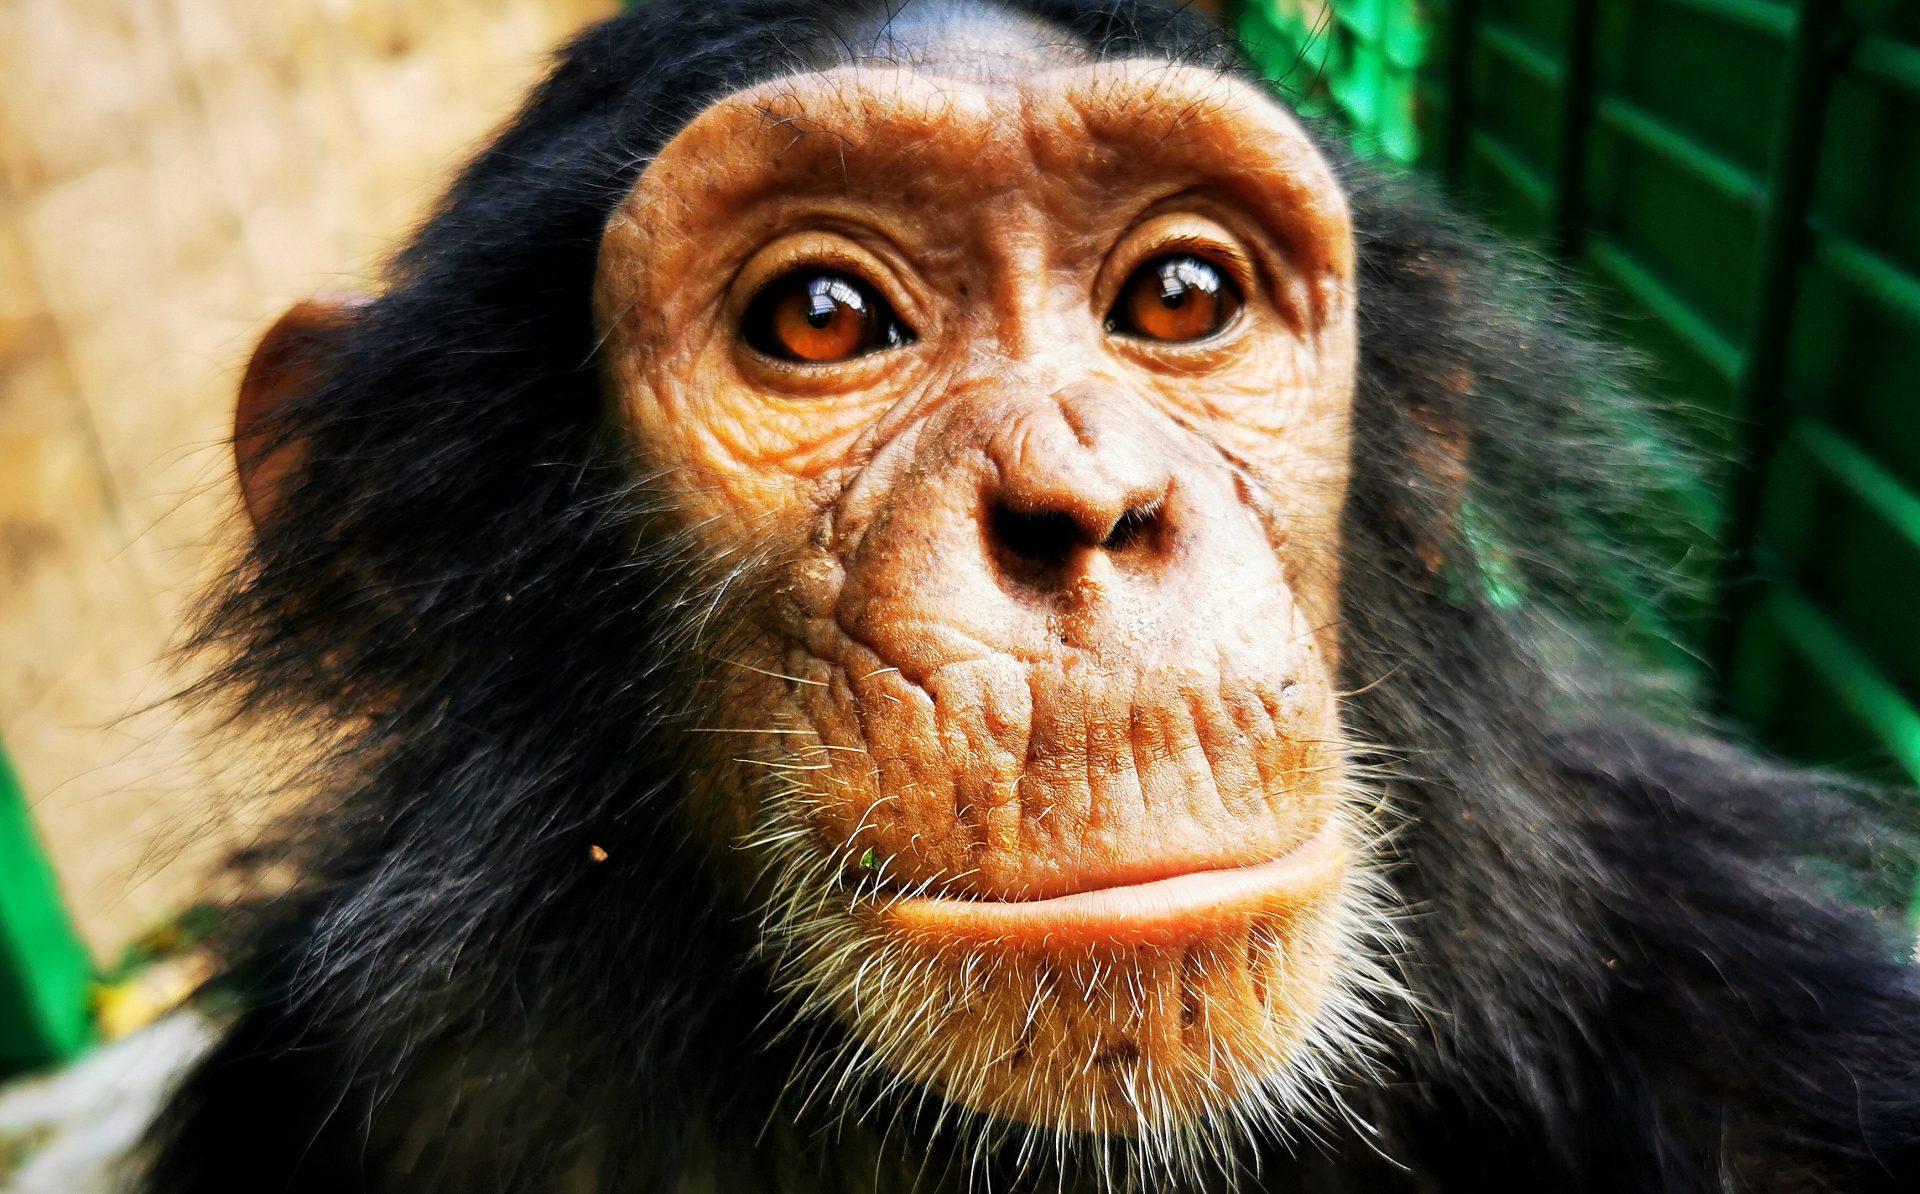 Chimp PASA doesn’t want to share